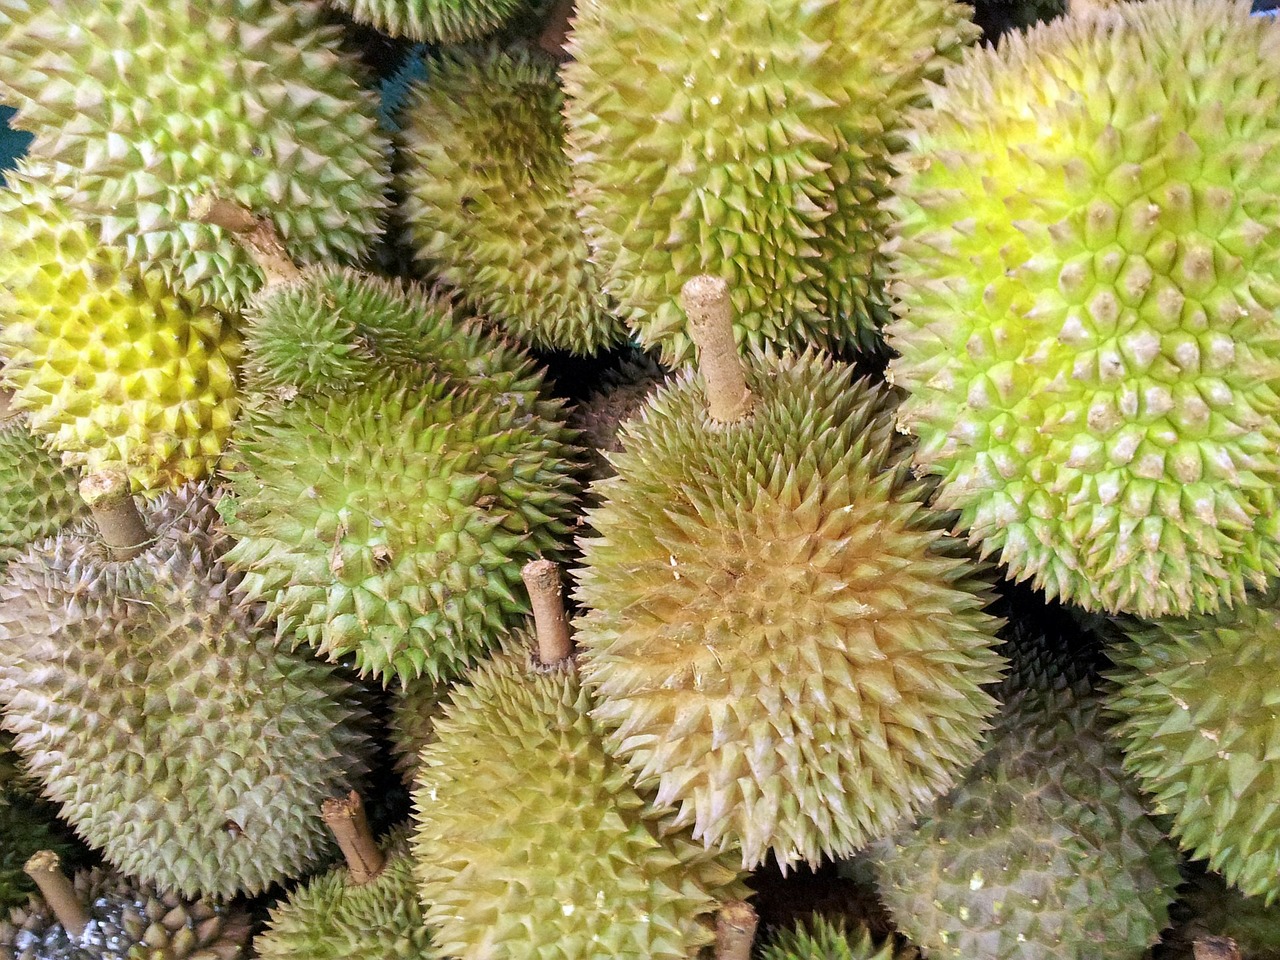 The most popular fruits exported to China from Thailand are durians, called the ‘king of fruit’; mangosteens, the ‘queen’, and longans.